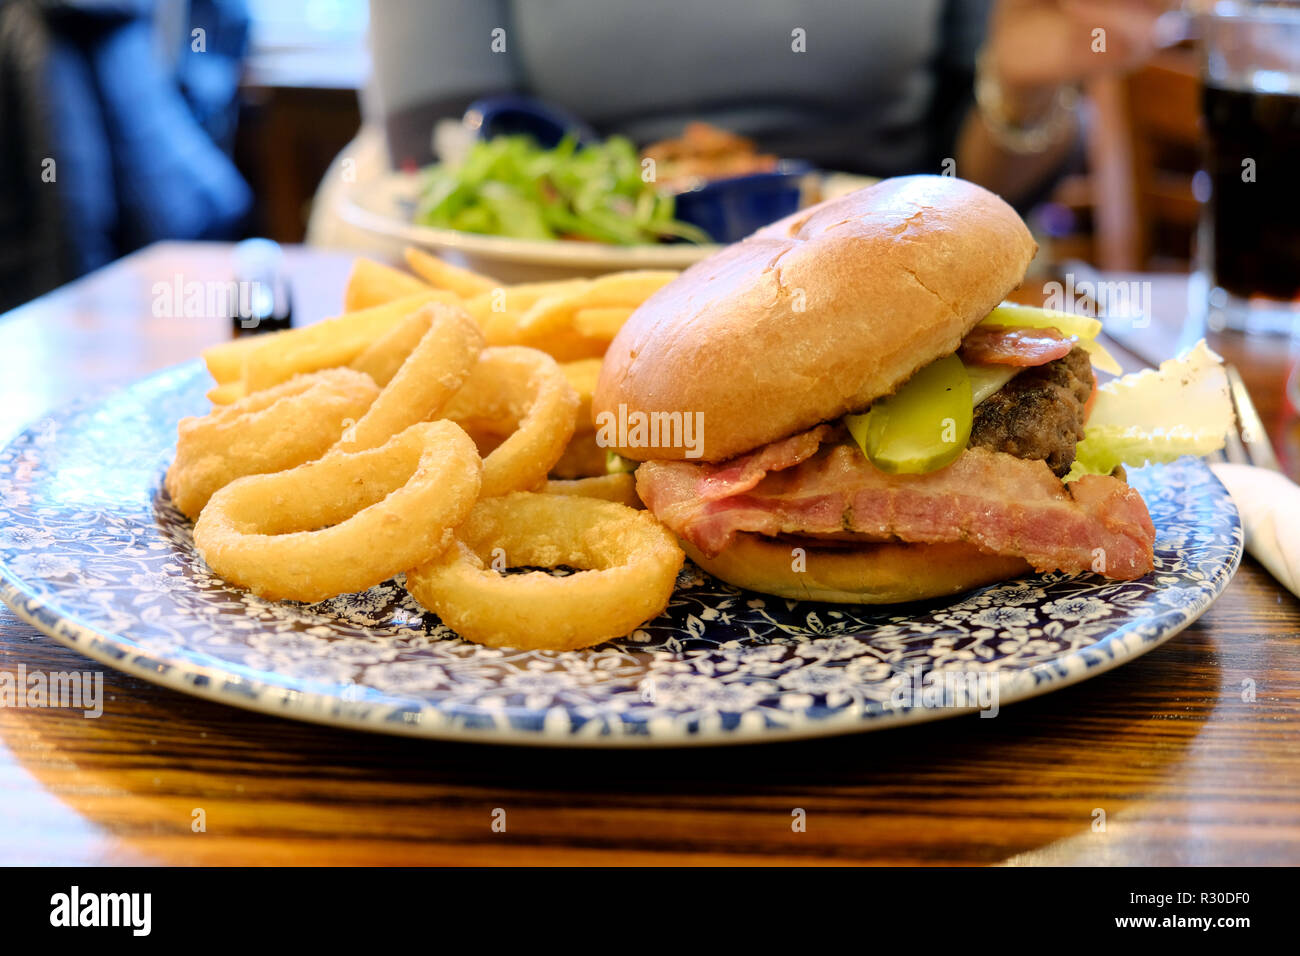 A JD Wetherspoons Ultimate Burger meal served with onion rings and chips. The meal is on a pub table in a busy Wetherspoons pub Stock Photo